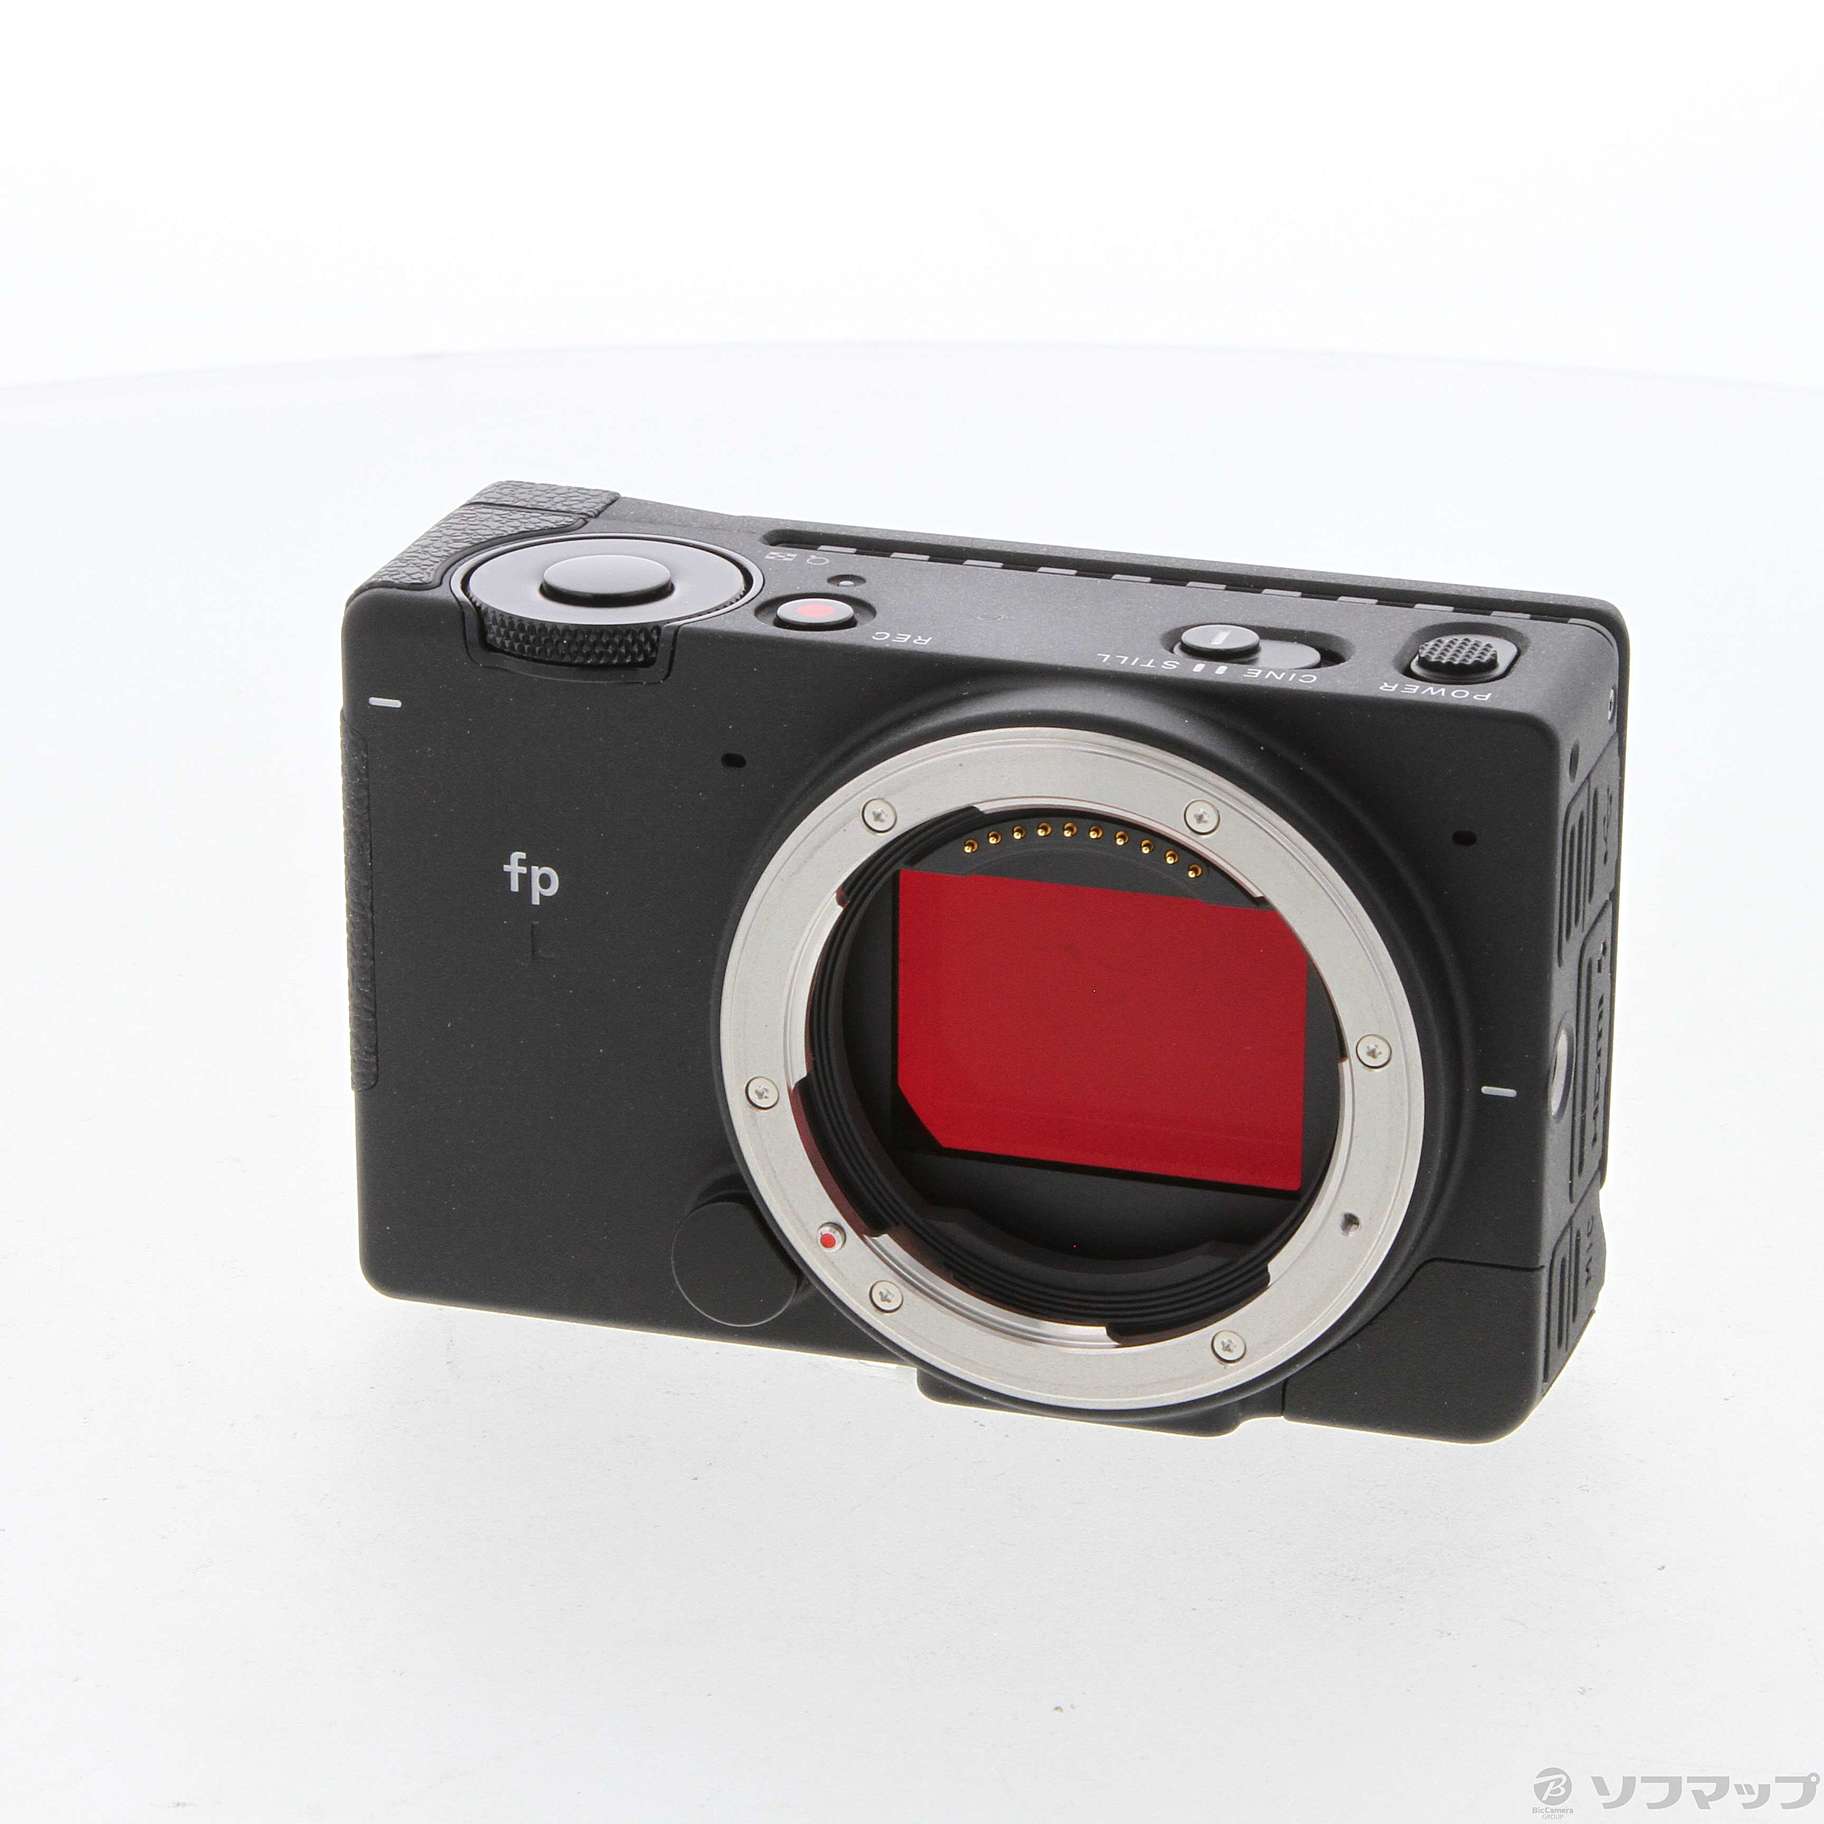 SIGMA fp L ELECTRONIC VIEWFINDER EVF-11 キット ◇01/17(火)値下げ！